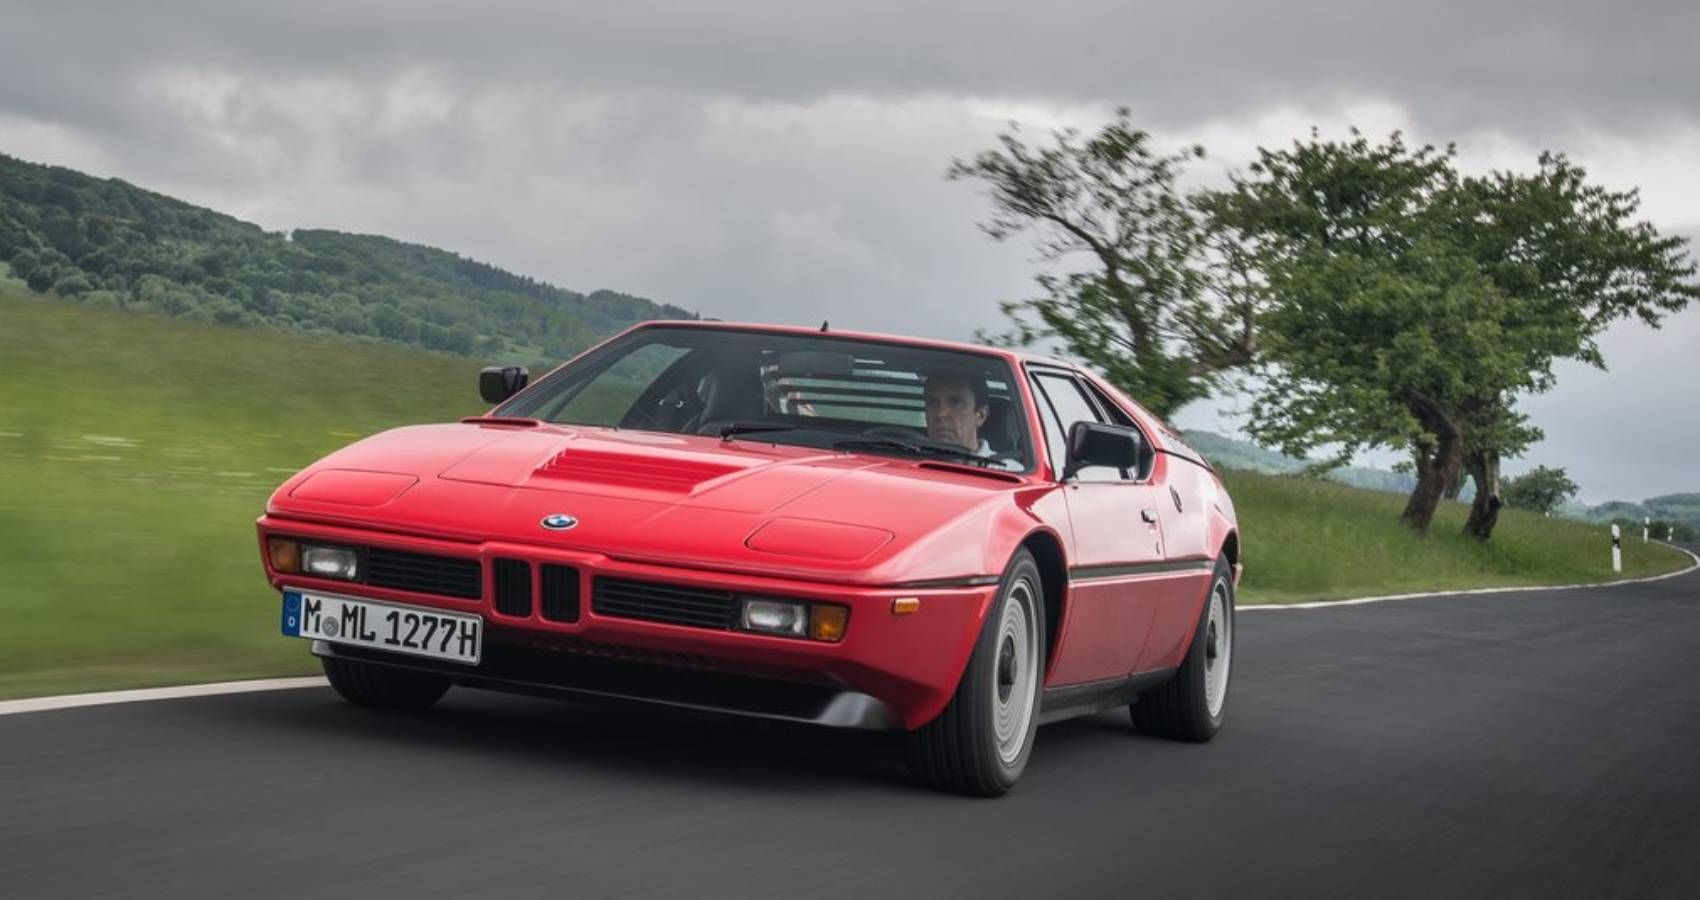 Red BMW M1 on the road